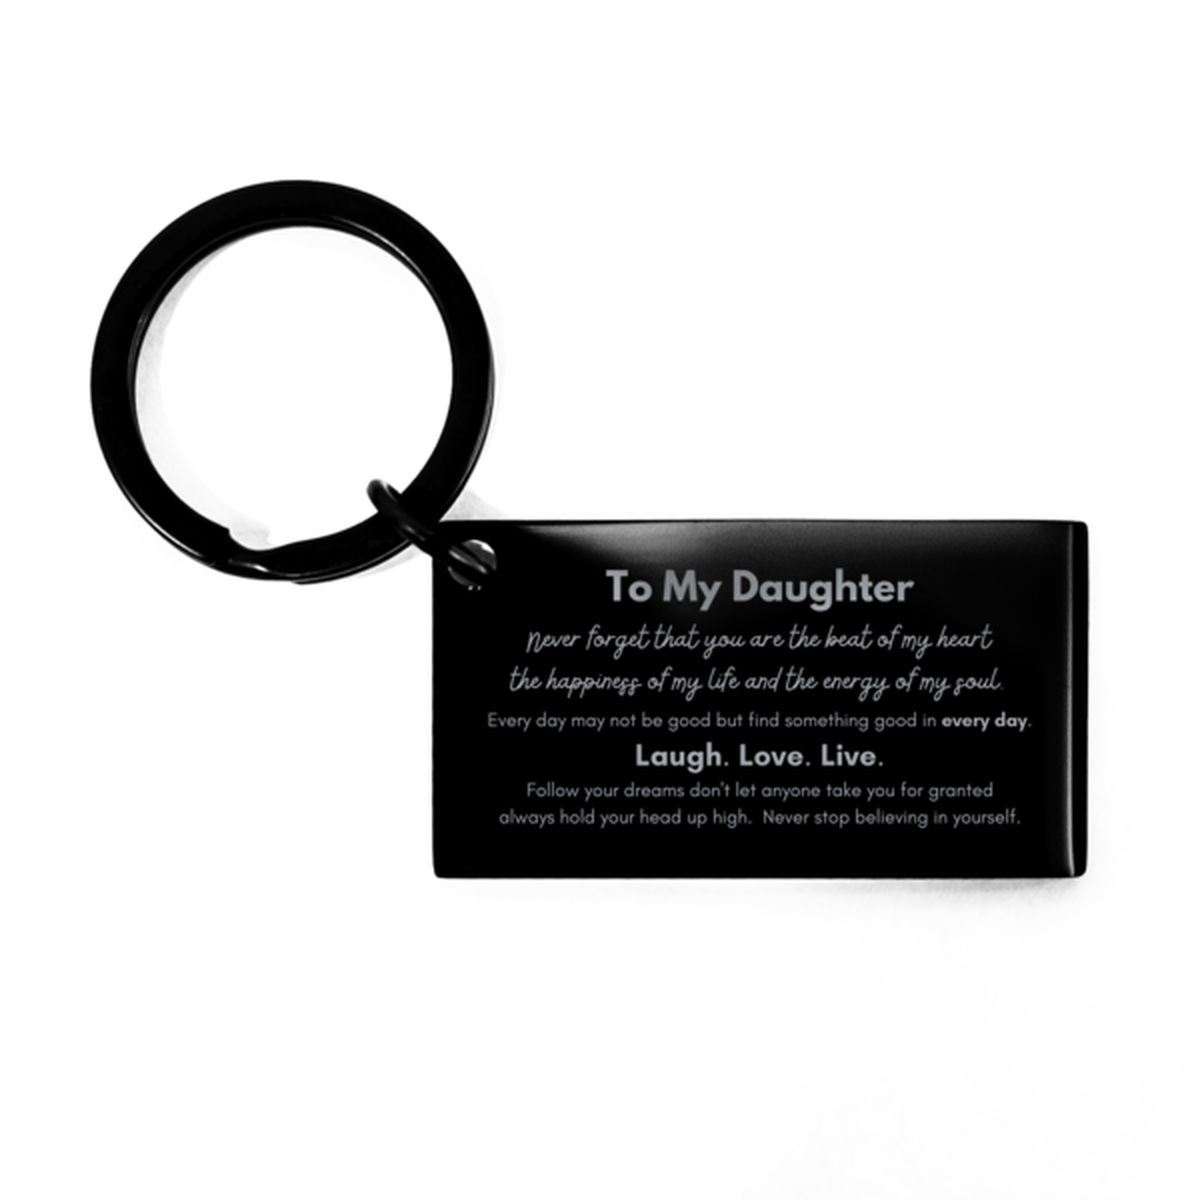 To My Daughter Keyring Gifts, Christmas Daughter Keychain Present, Birthday Unique Motivational For Daughter, To My Daughter Never forget that you are the beat of my heart the happiness of my life and the energy of my soul